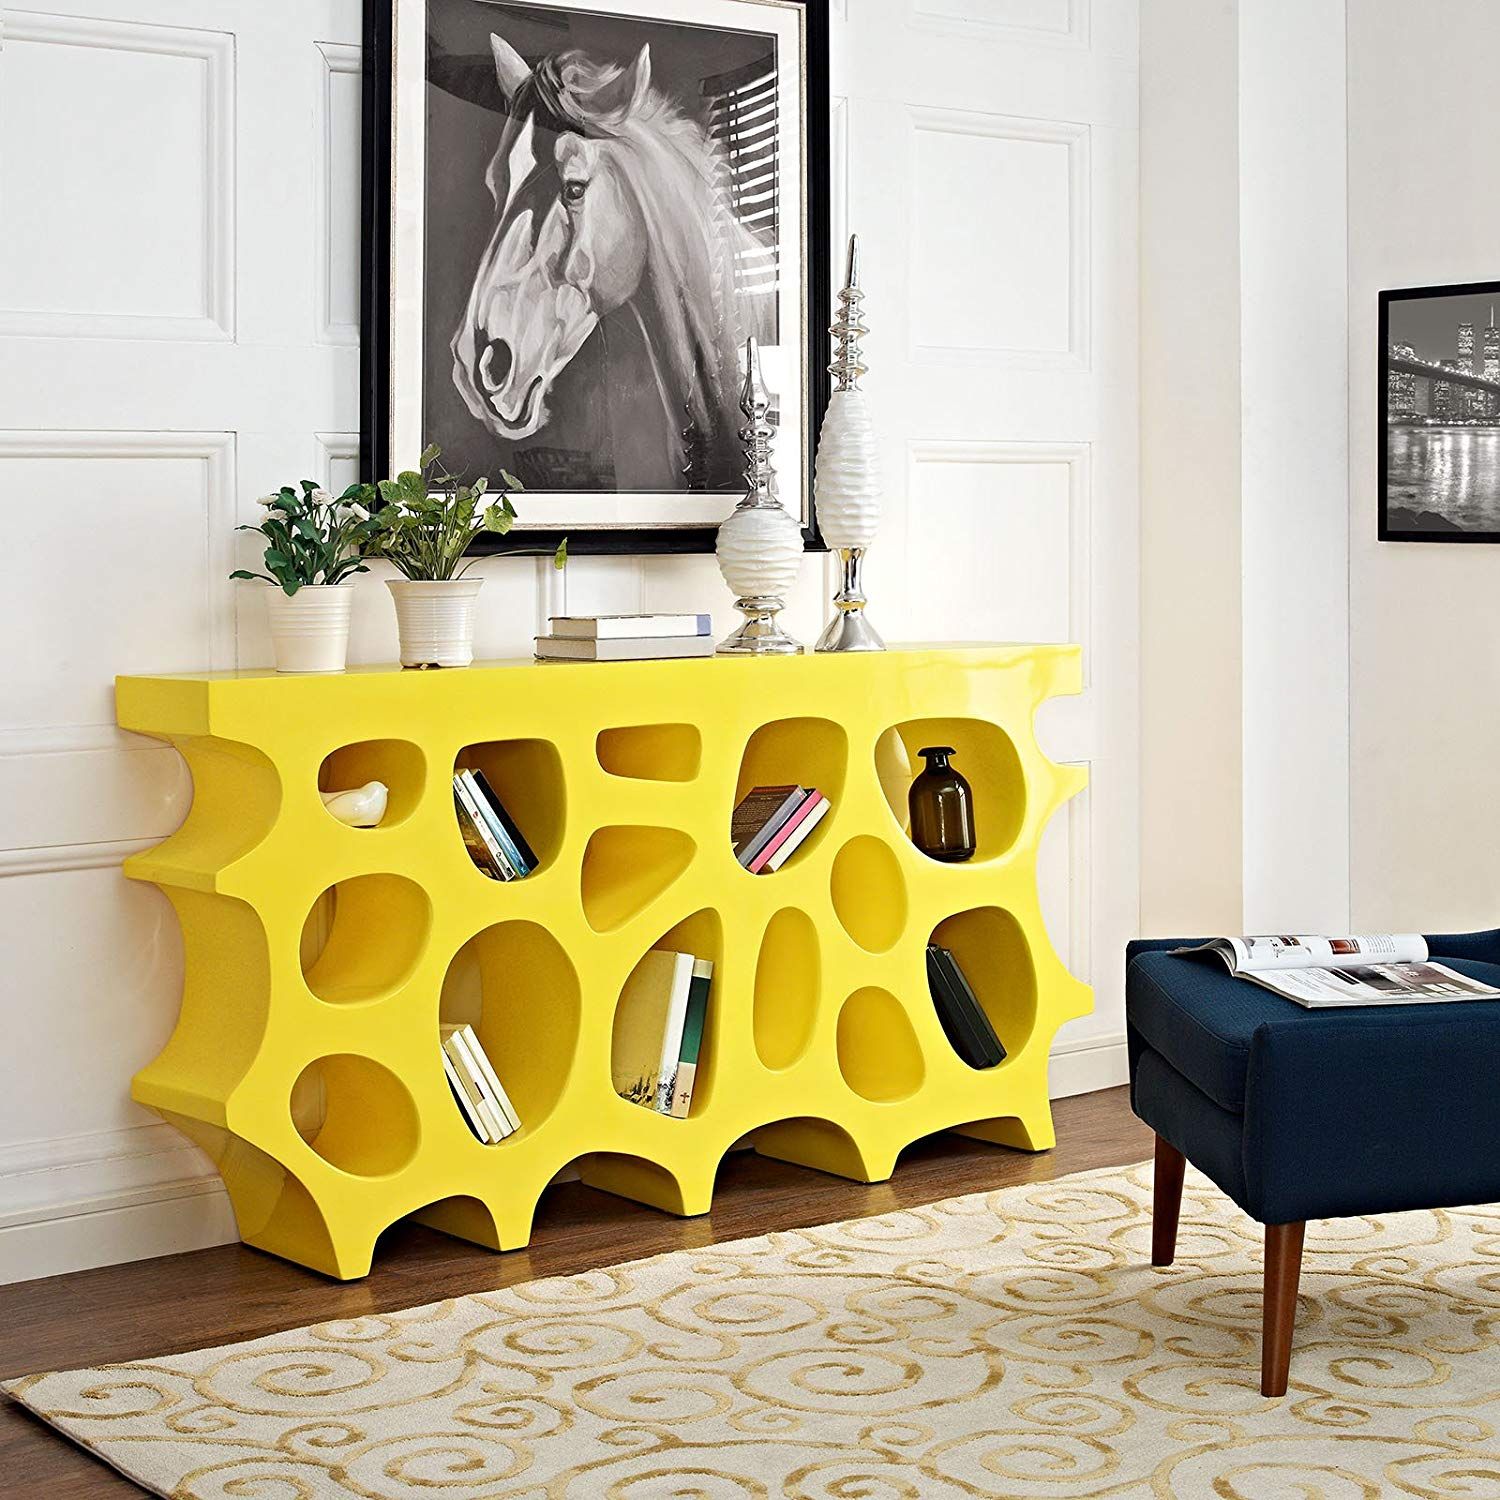 Creative Modern Console Table Sculptural Bright Yellow For Modern Console Tables (View 18 of 20)